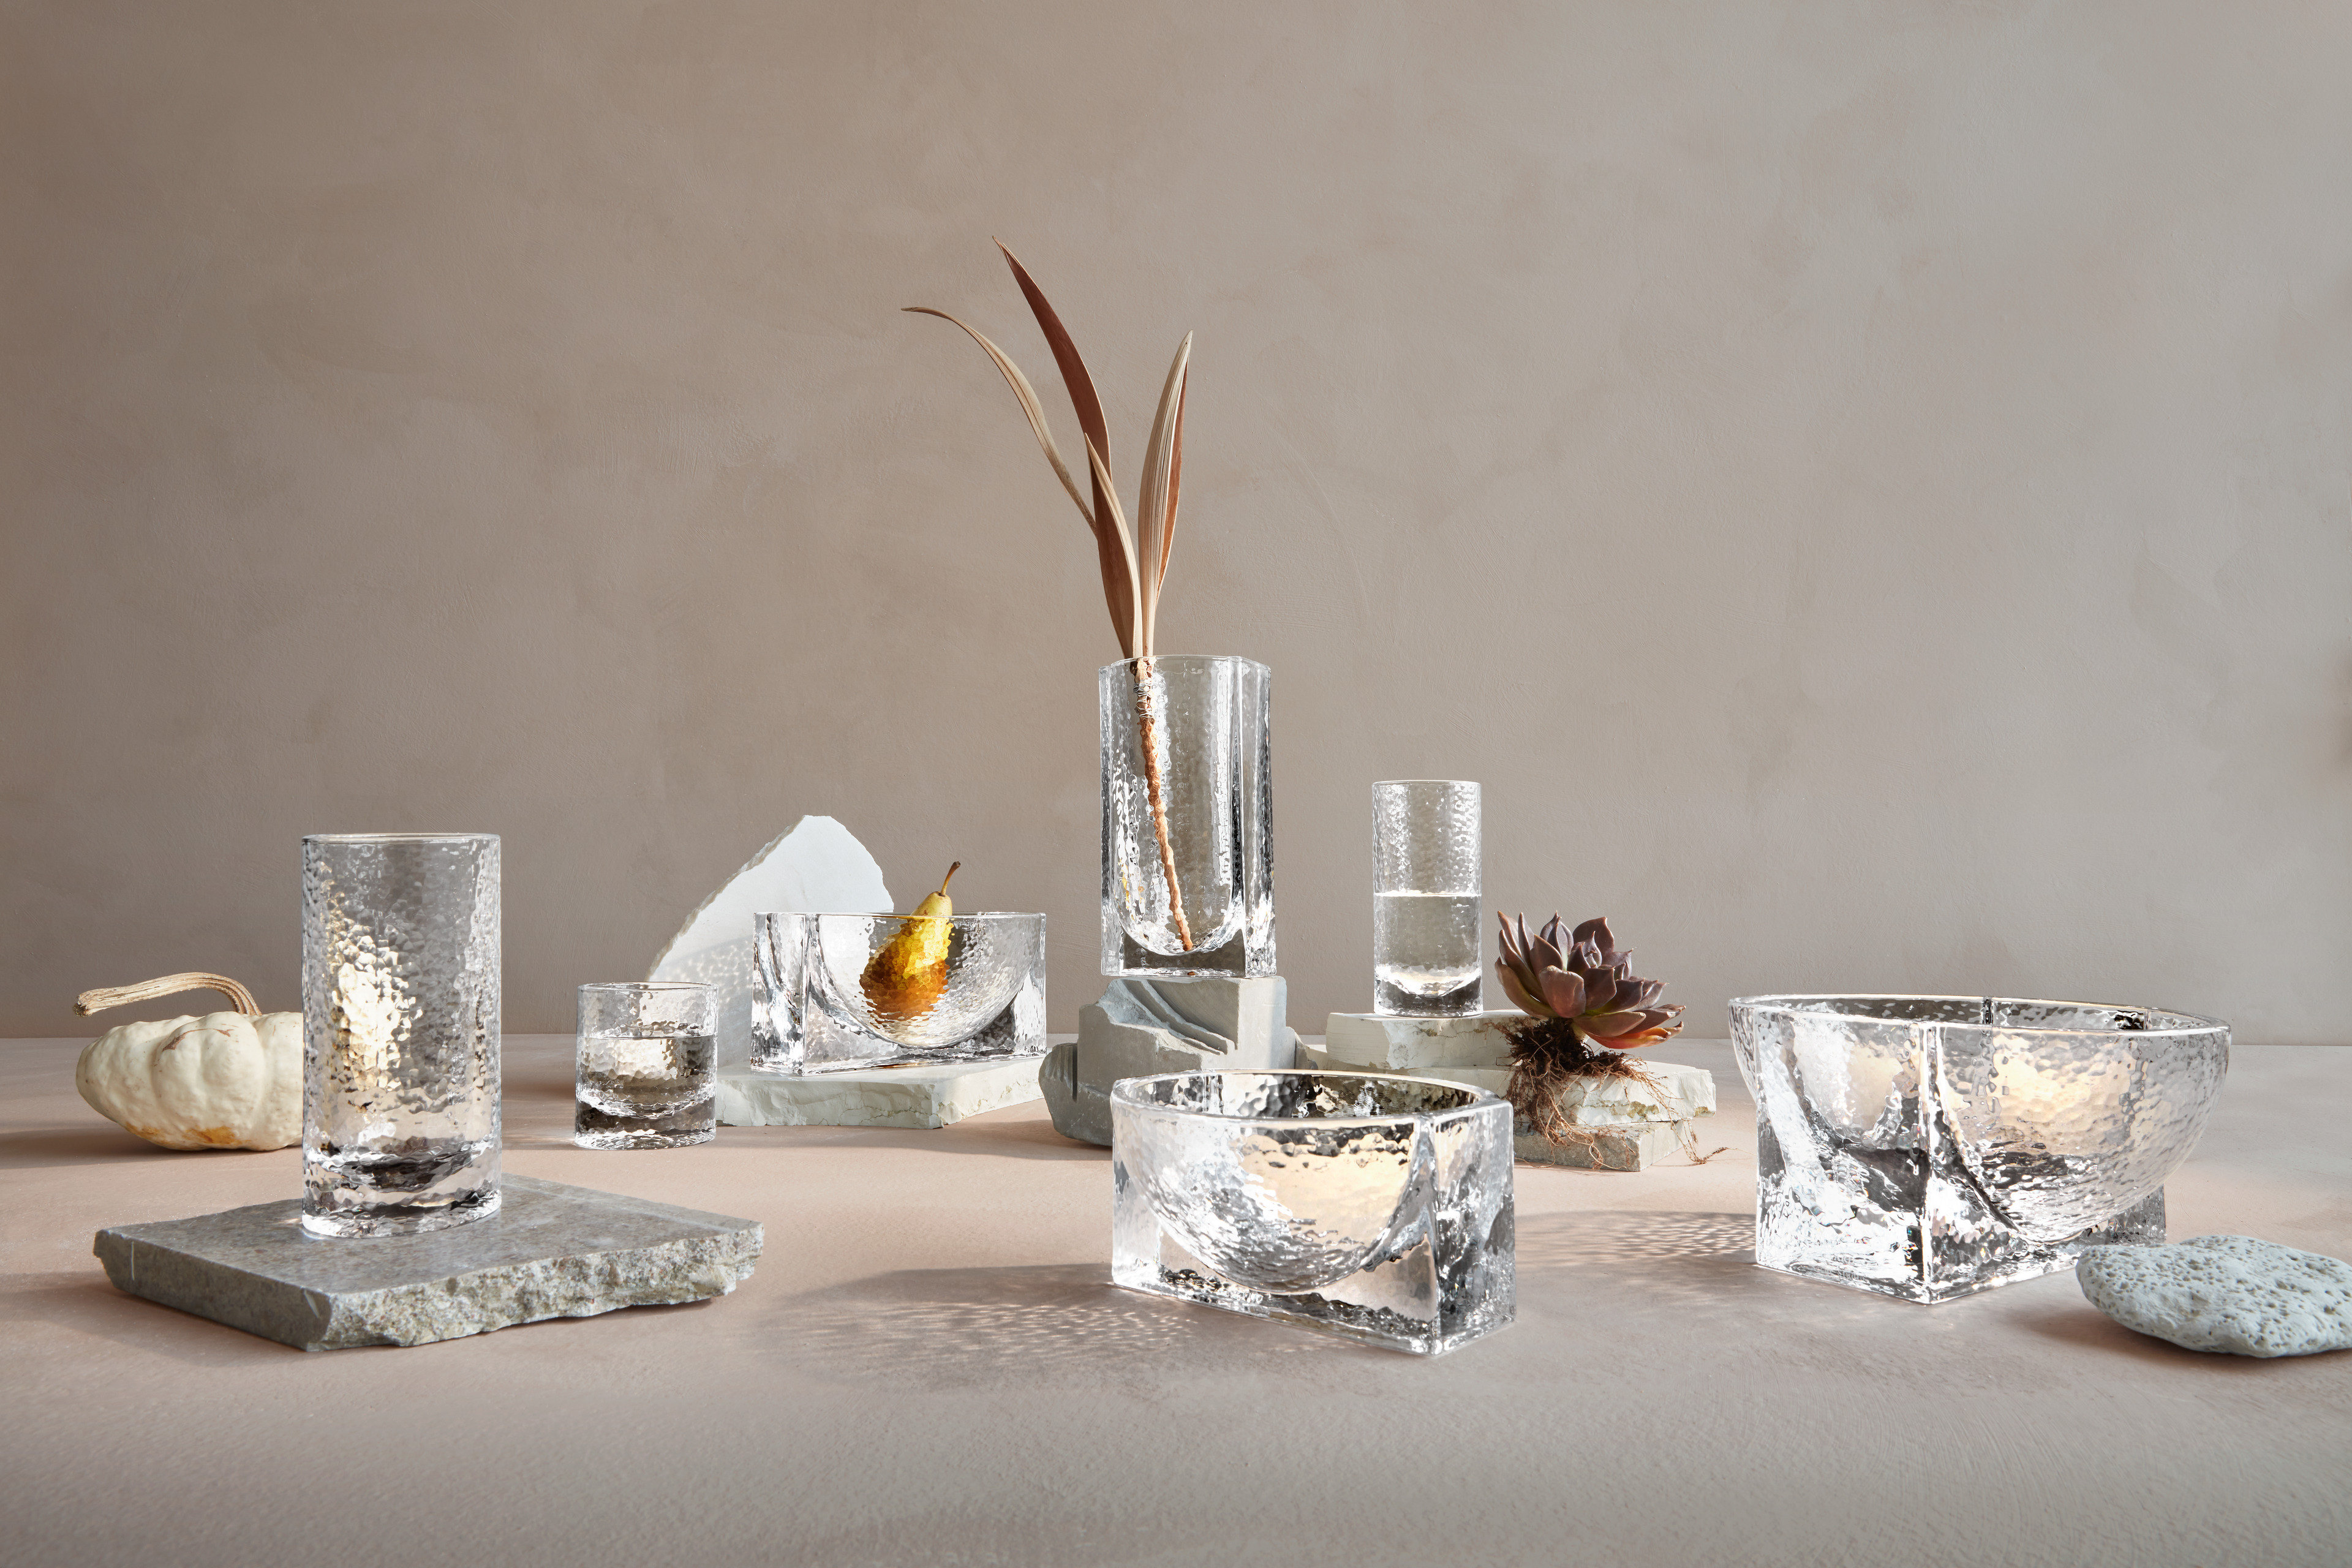 Vases and bowls in the Forma series from Holmegaard